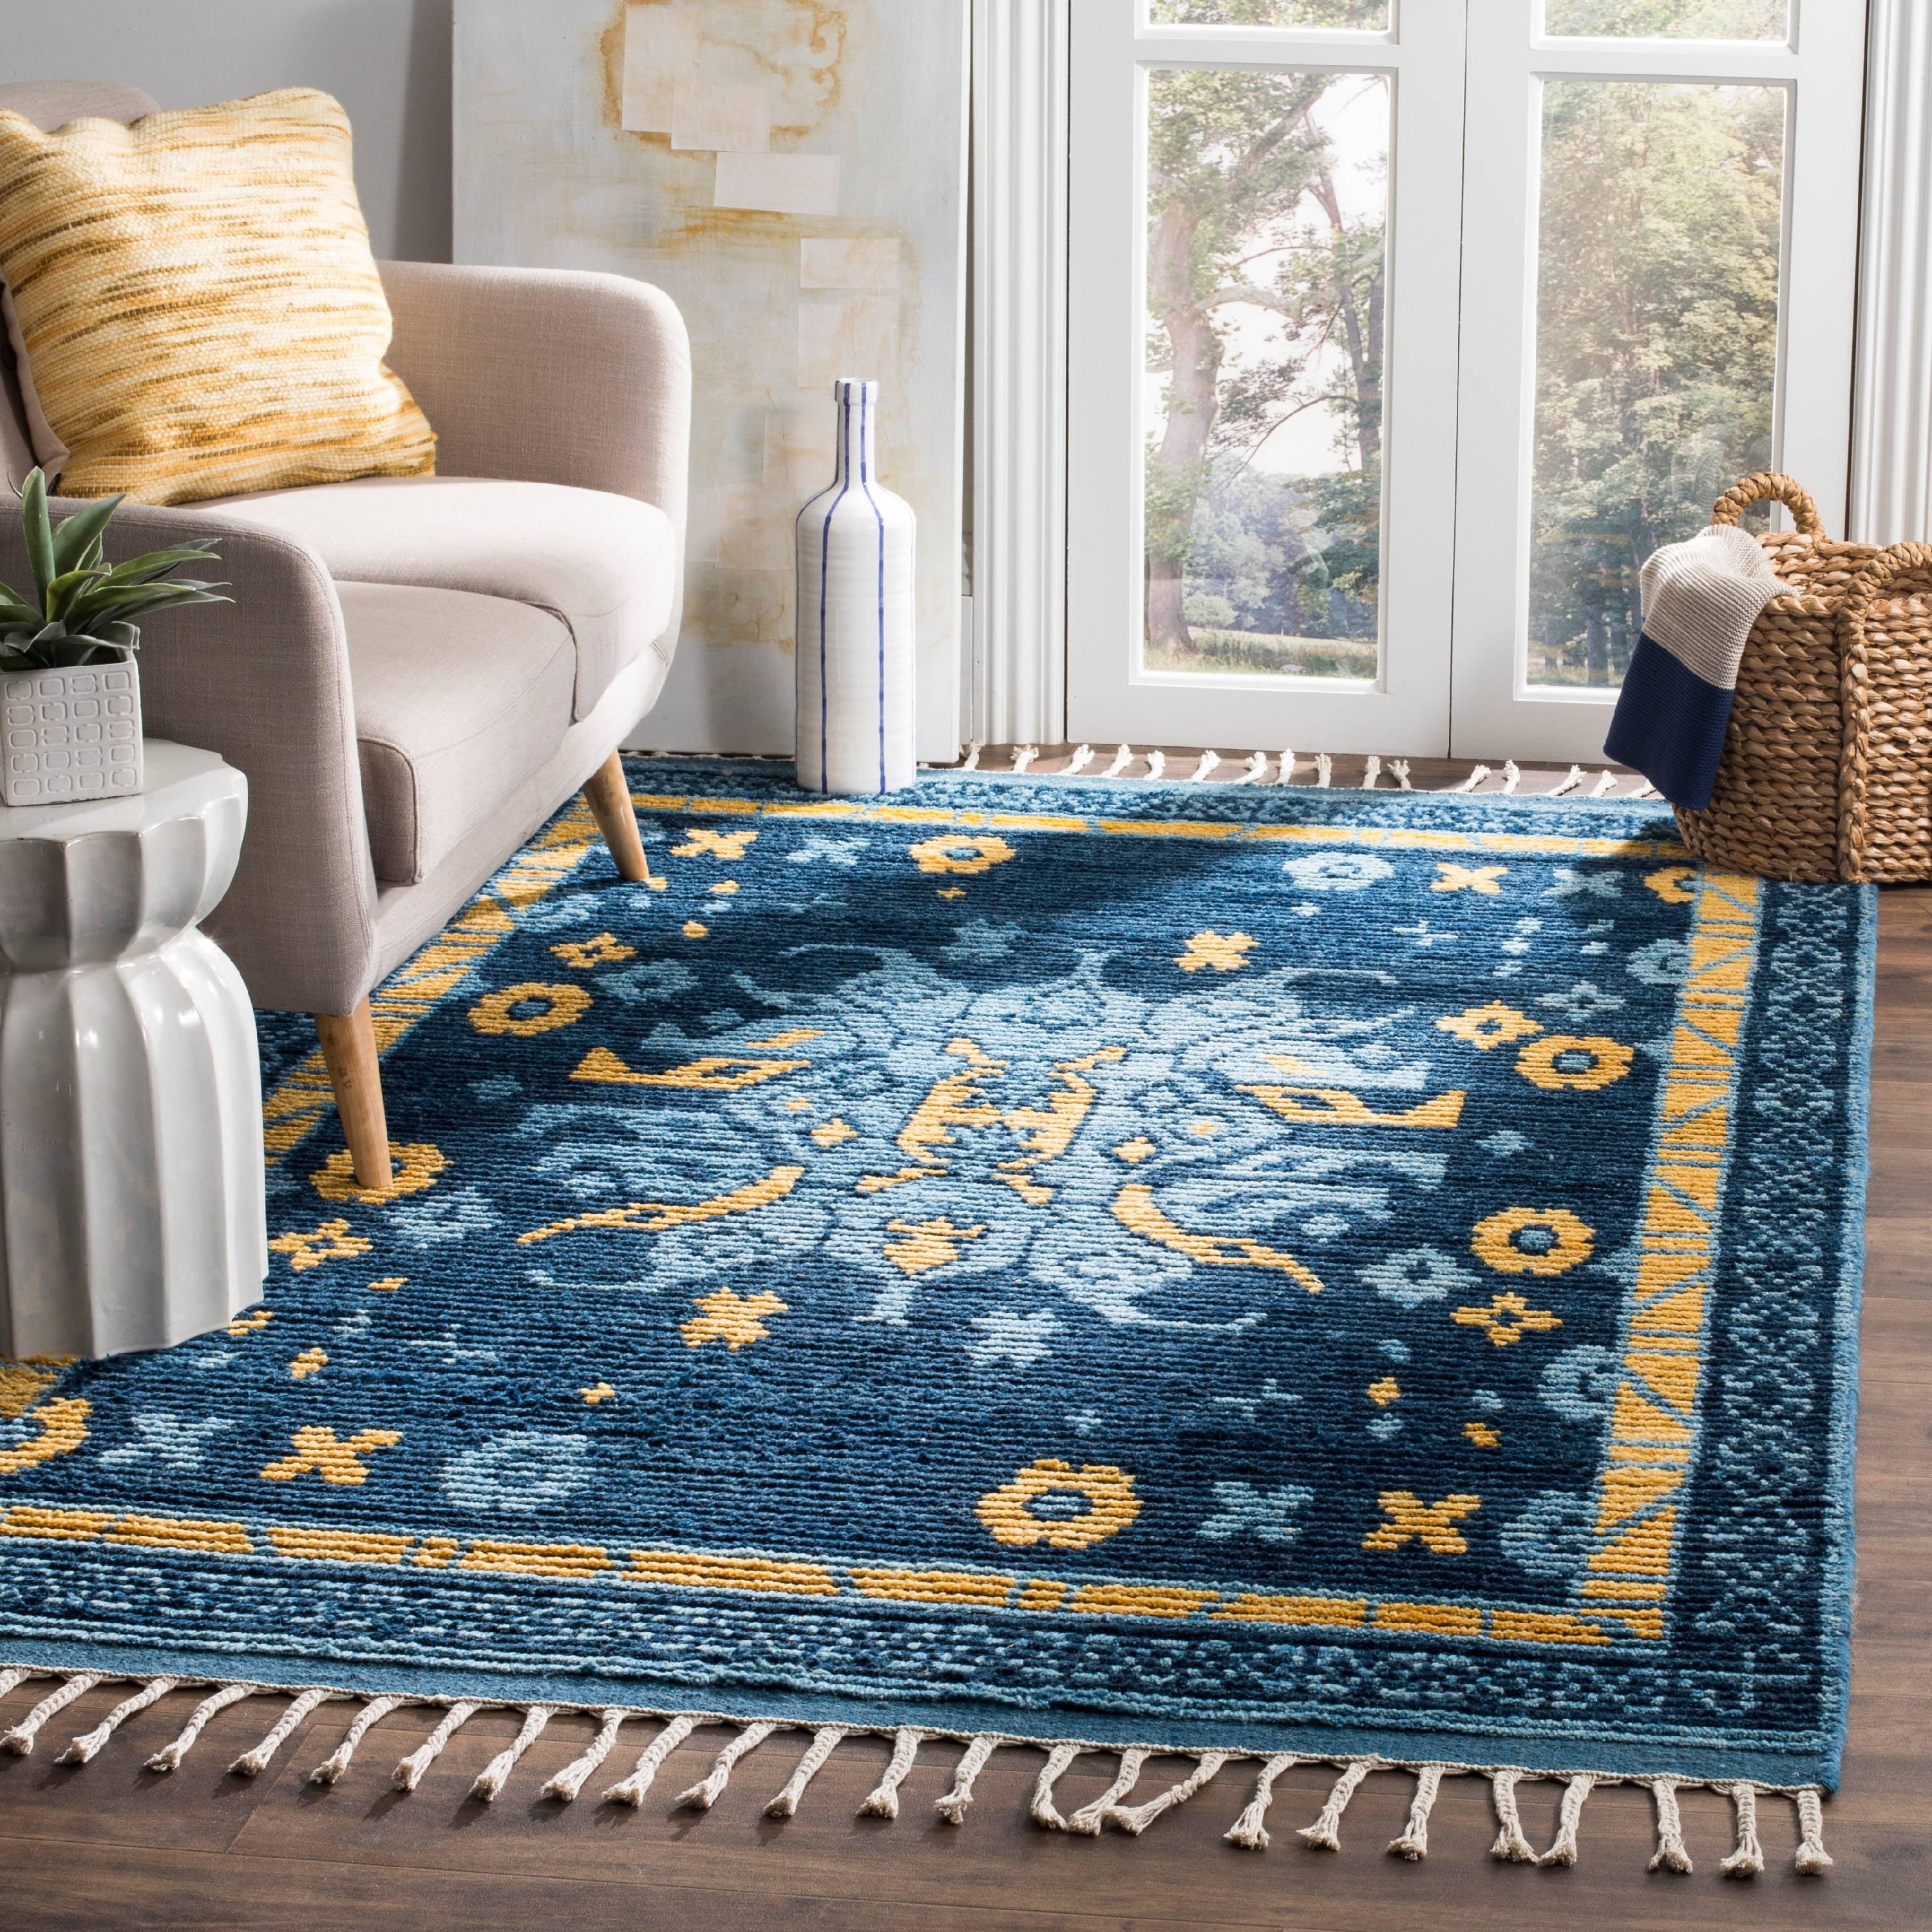 Hand-Knotted Tribal Wool Area Rug in Blue/Gold, 8' x 10'